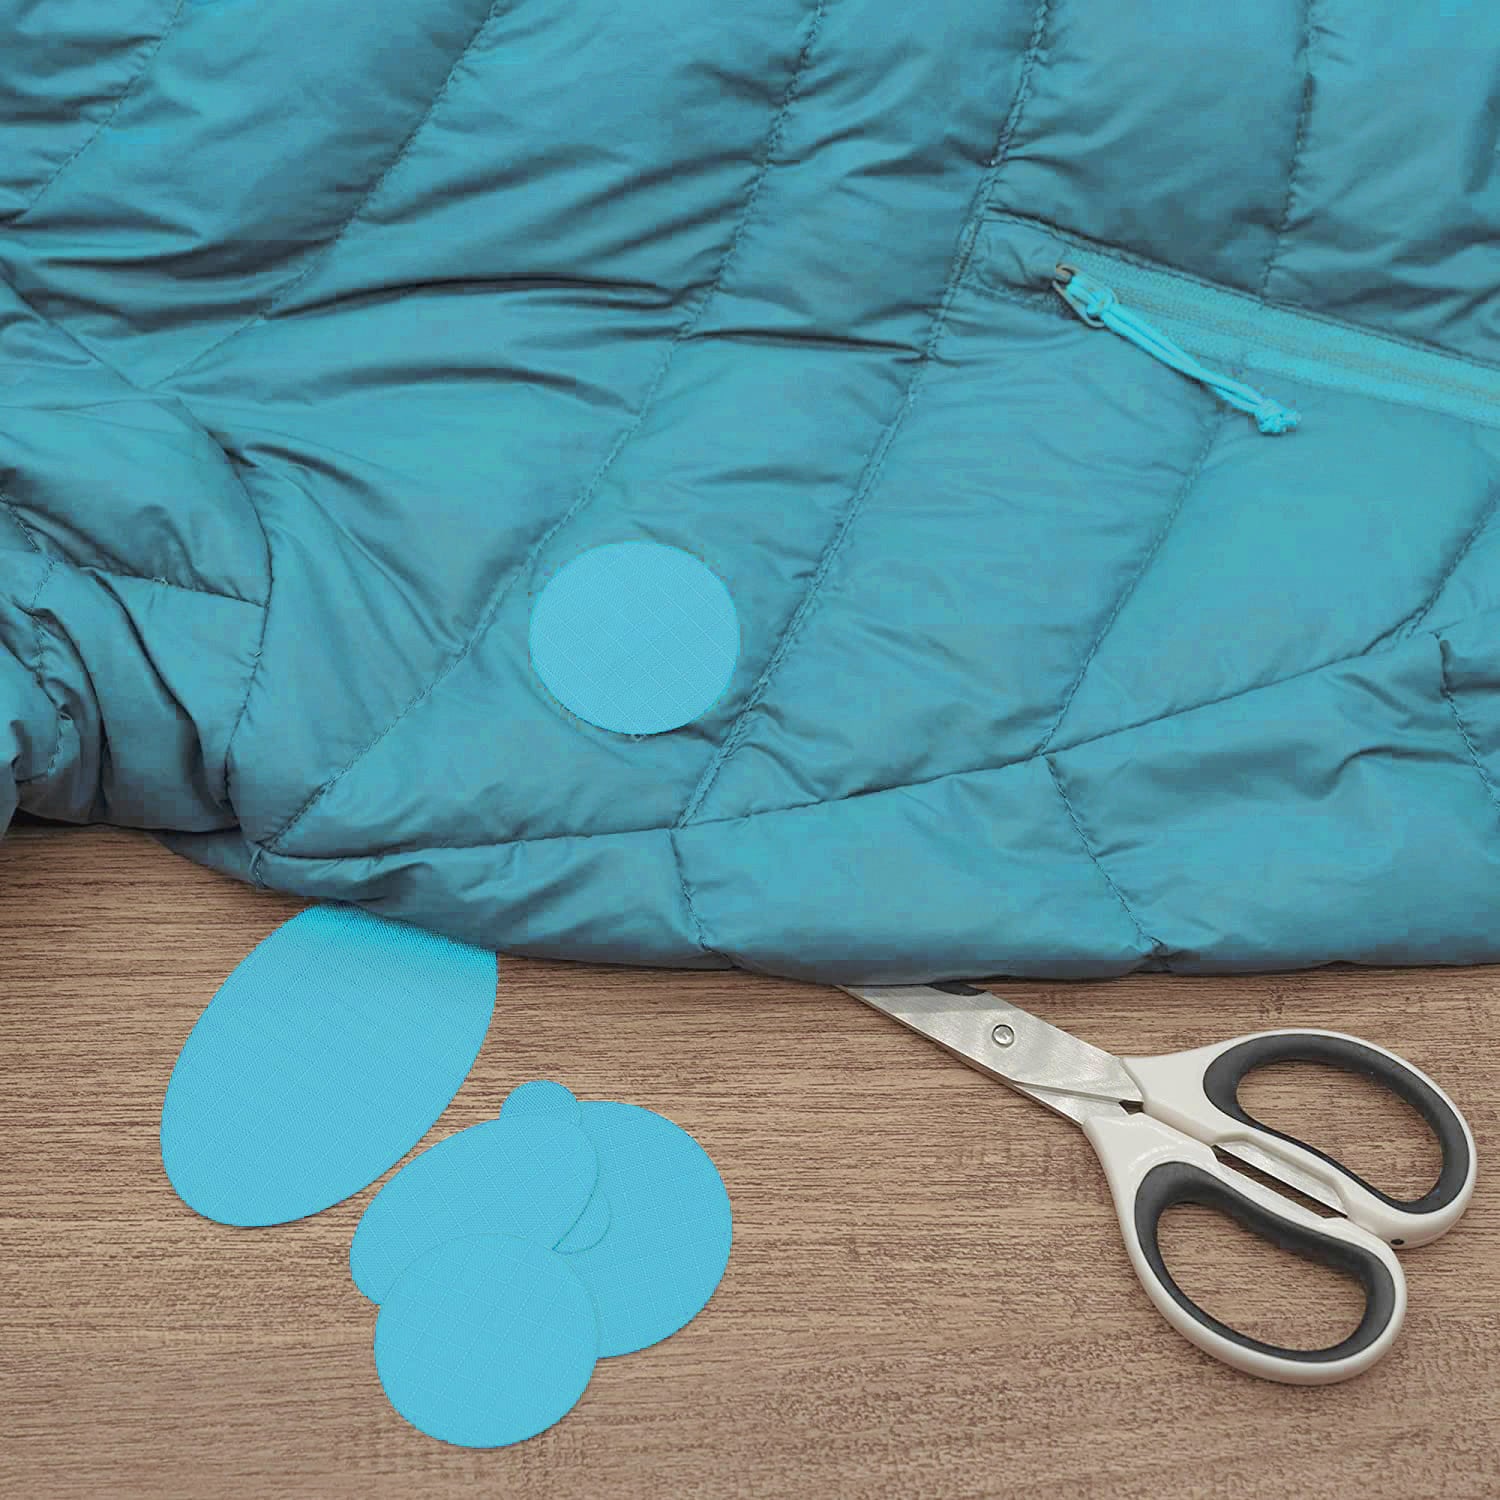 aZengear Turquoise Down Jacket Repair Patches | Pre-Cut, Self-Adhesive, Soft, Waterproof